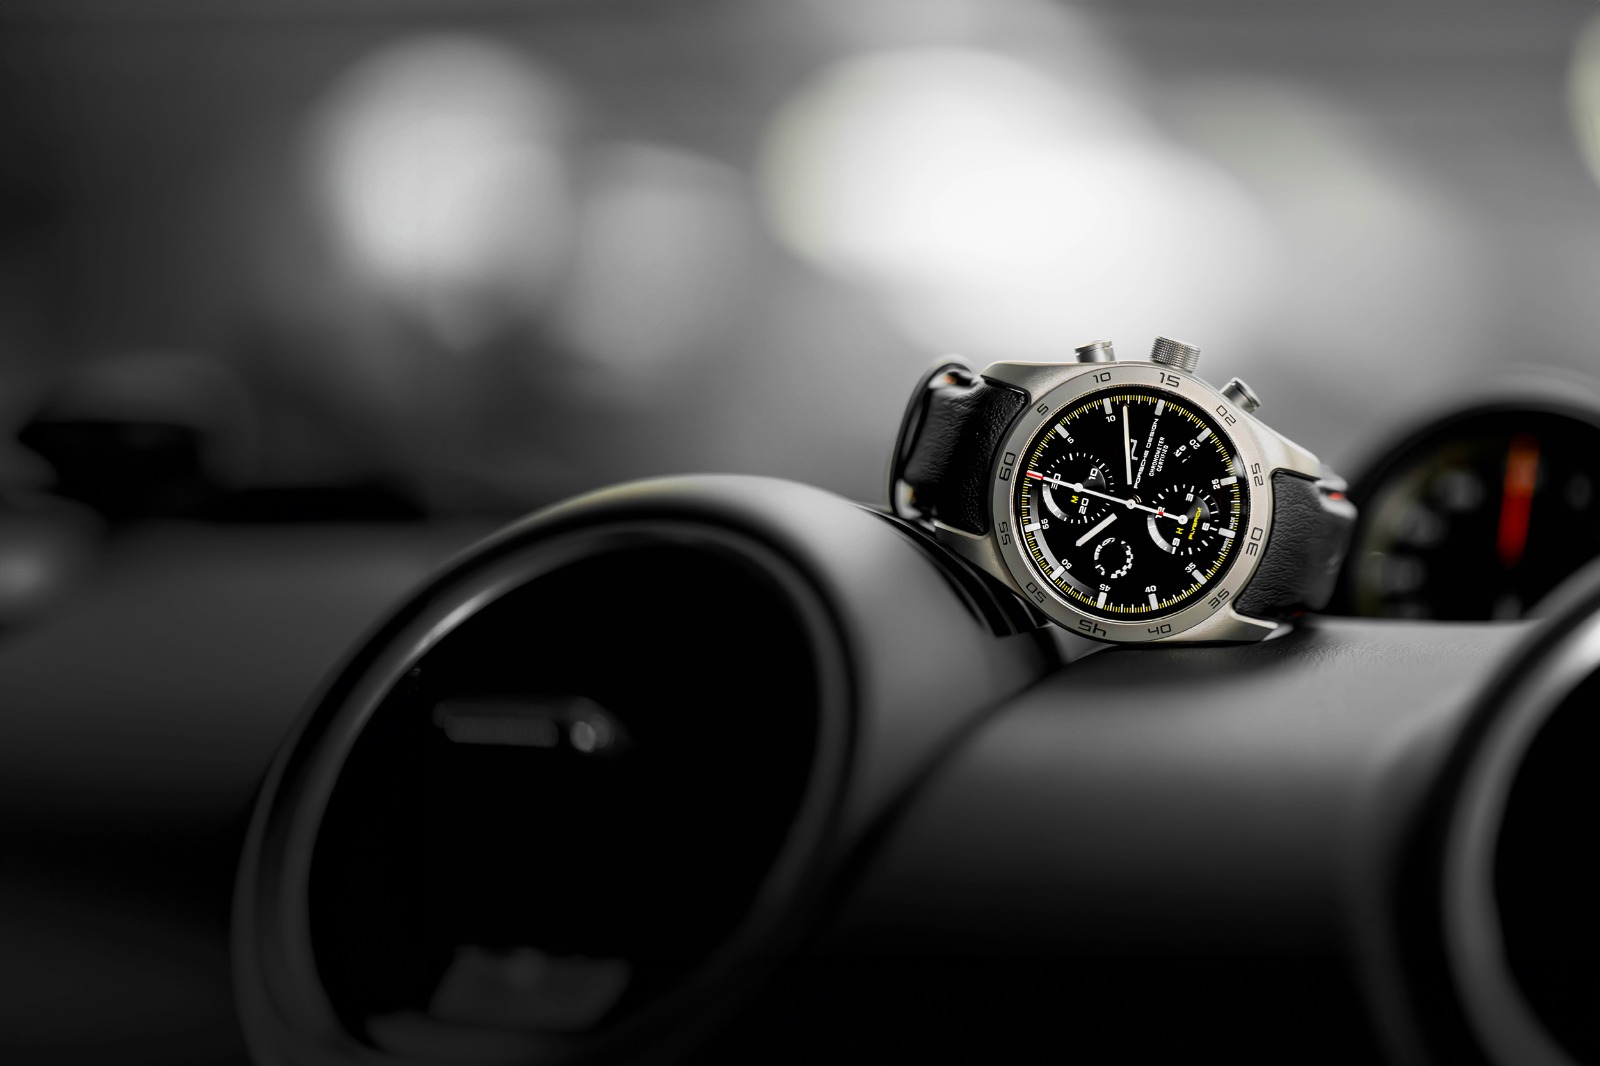 New Release: Bremont Williams Racing WR-45 Watch | aBlogtoWatch